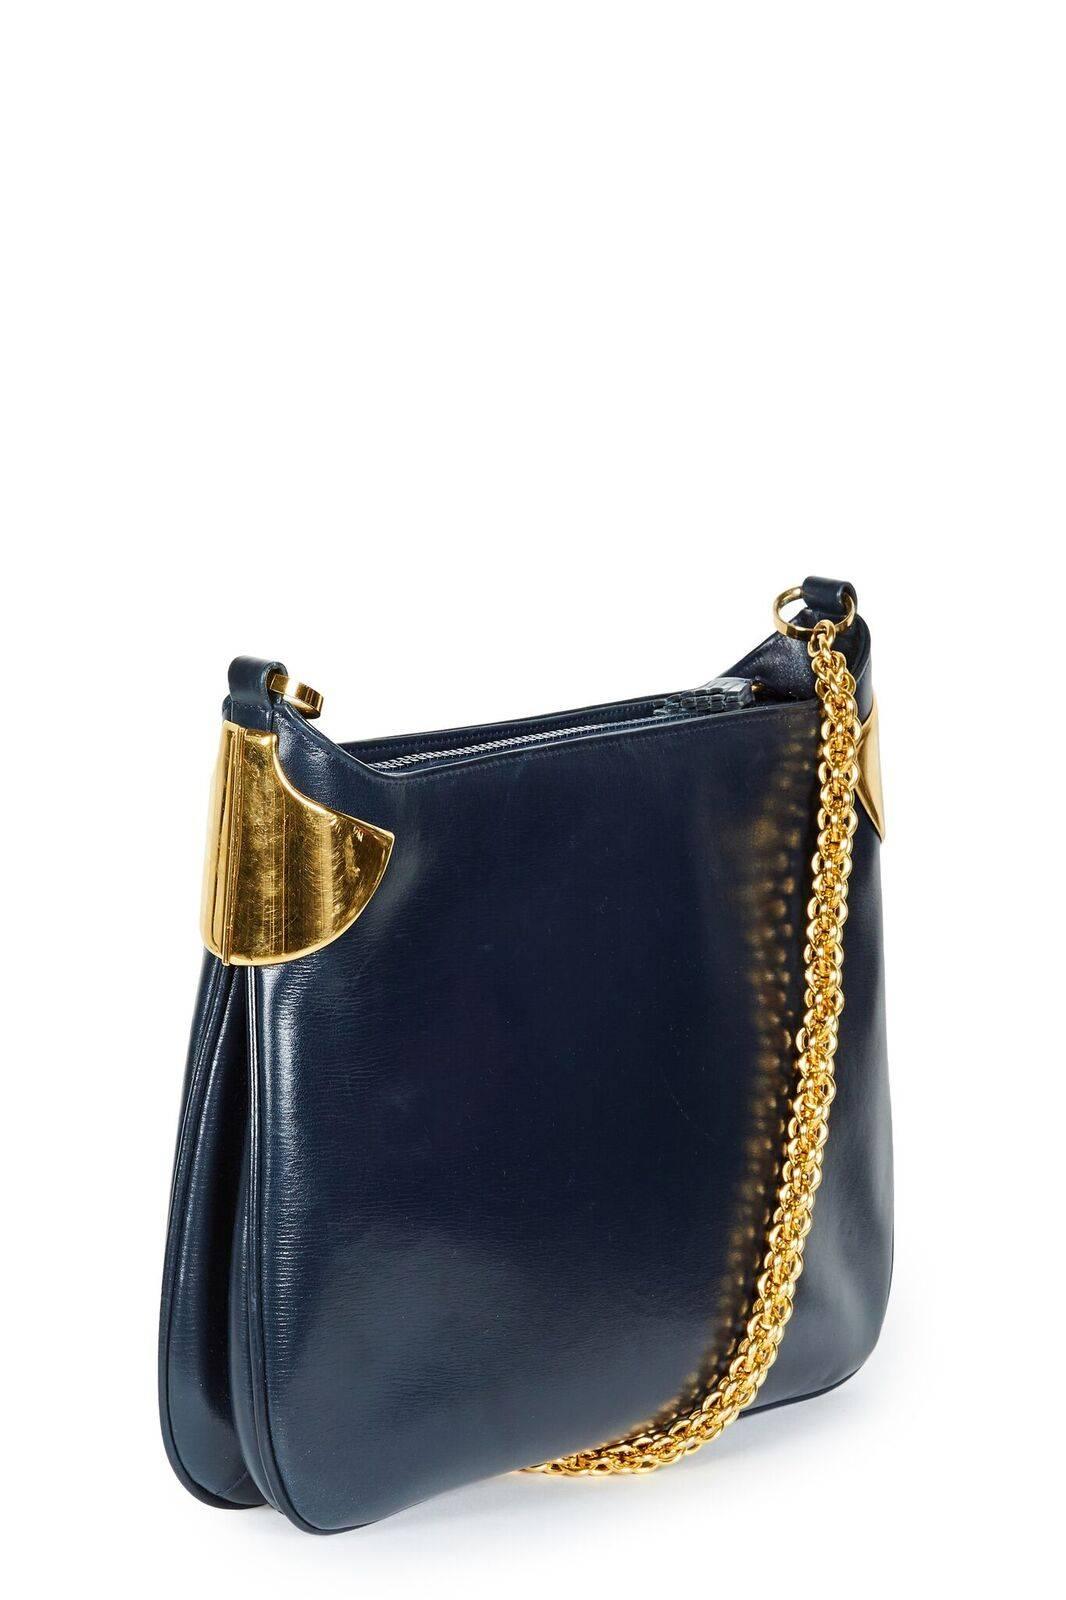 This is a fabulous vintage early 1980s or late 1970s Gucci leather chain shoulder bag suitable for all occasions.  It is made from soft and supple navy blue leather and has a beautiful and weighty gold-toned chain and hardware throughout.  The